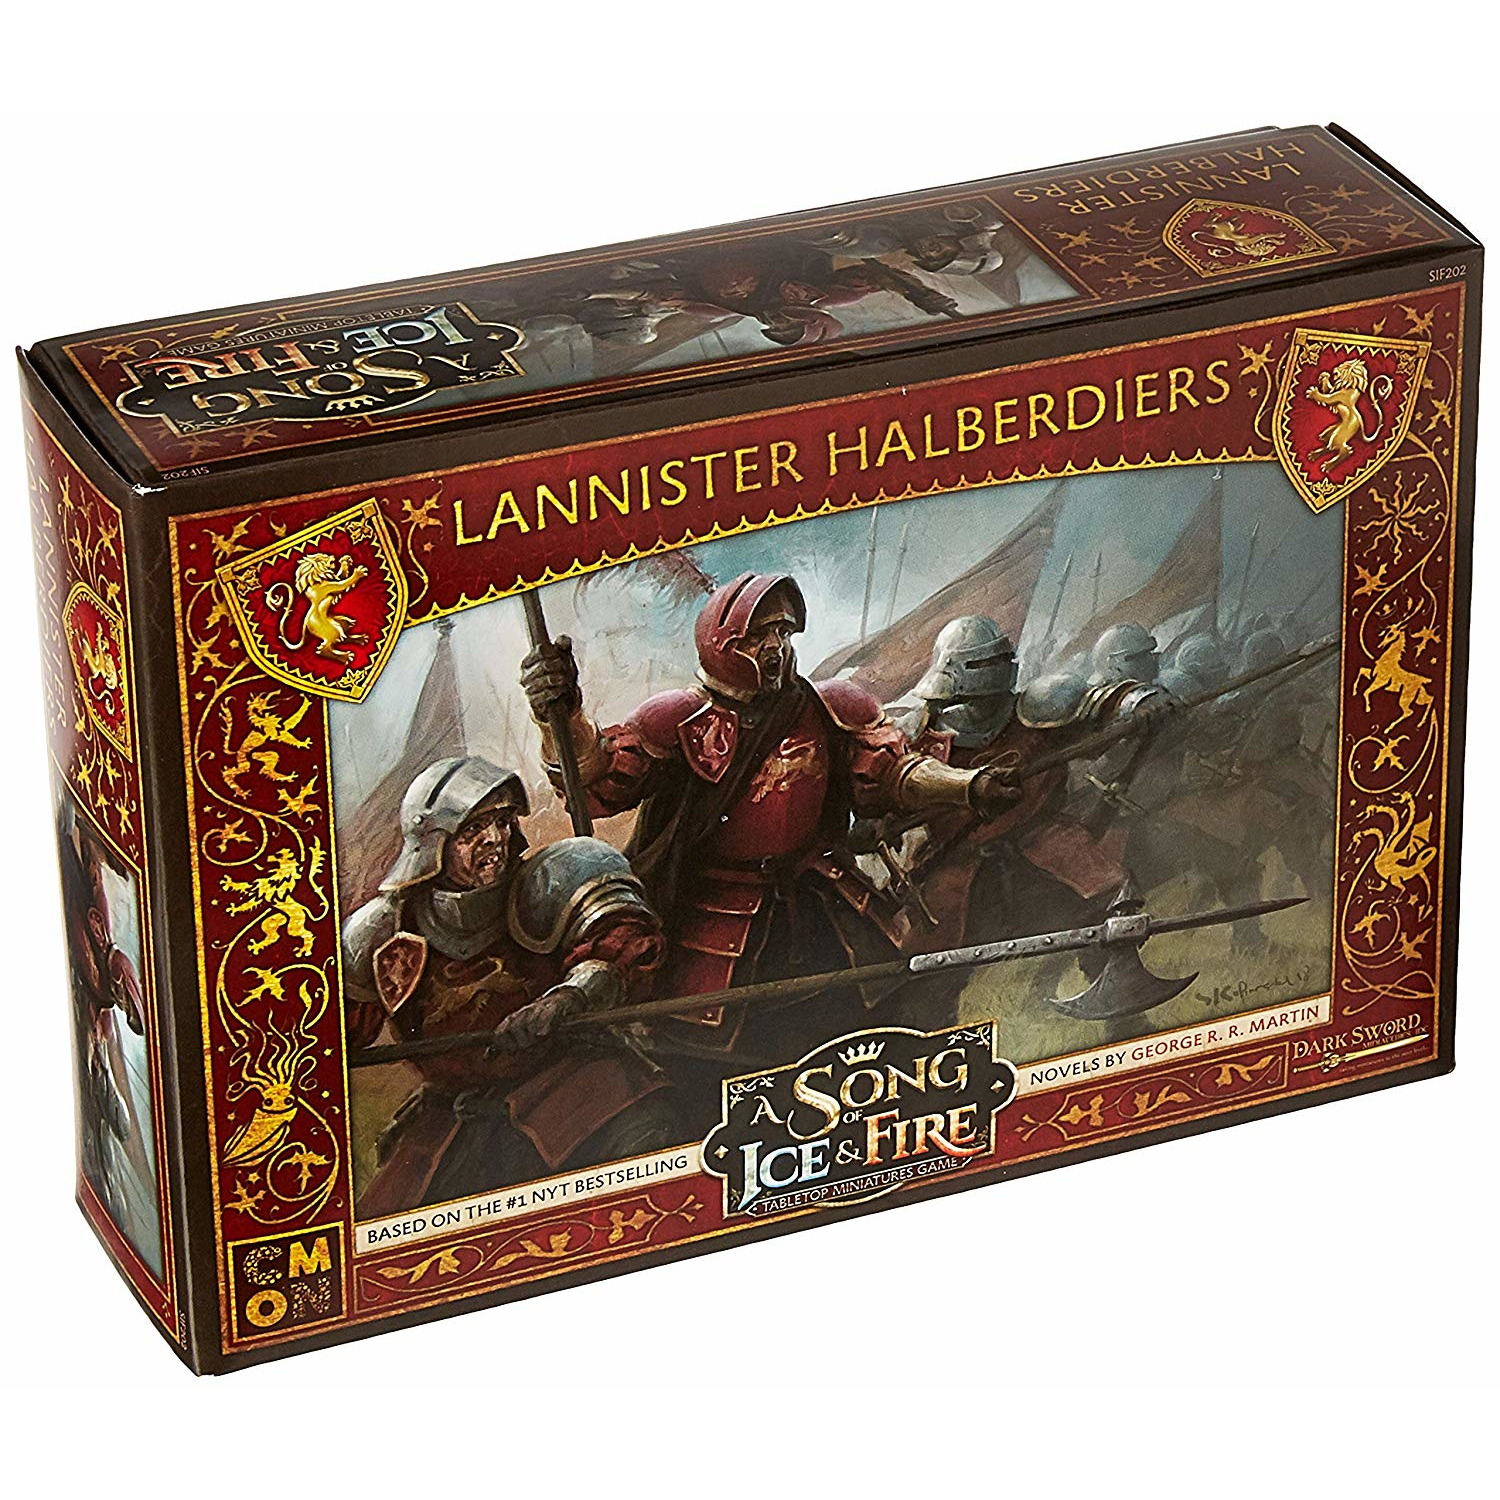 A Song of Ice & Fire: Tabletop Miniatures Game Lannister Halberdiers Unit Box, by CMON - image 1 of 8